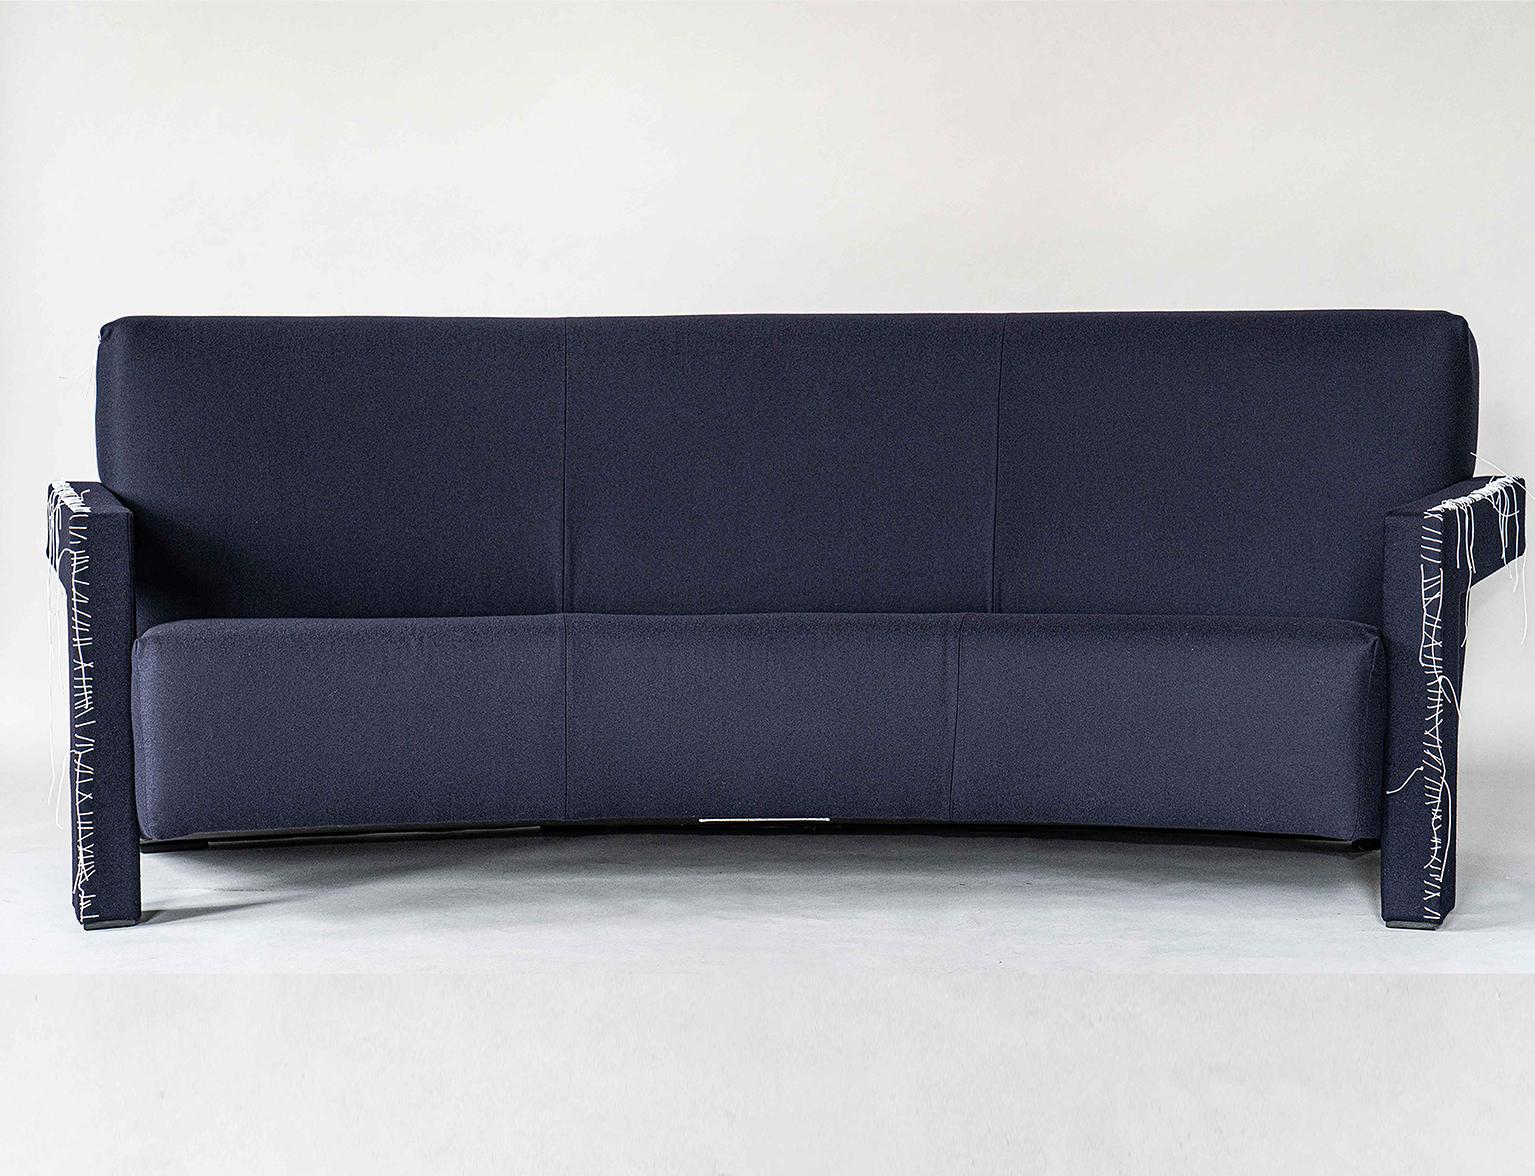 Utrecht 3-Seater Sofa with Curved Back, by Gerrit Rietveld, Remodeled by Svan  In Excellent Condition For Sale In Los Angeles, CA